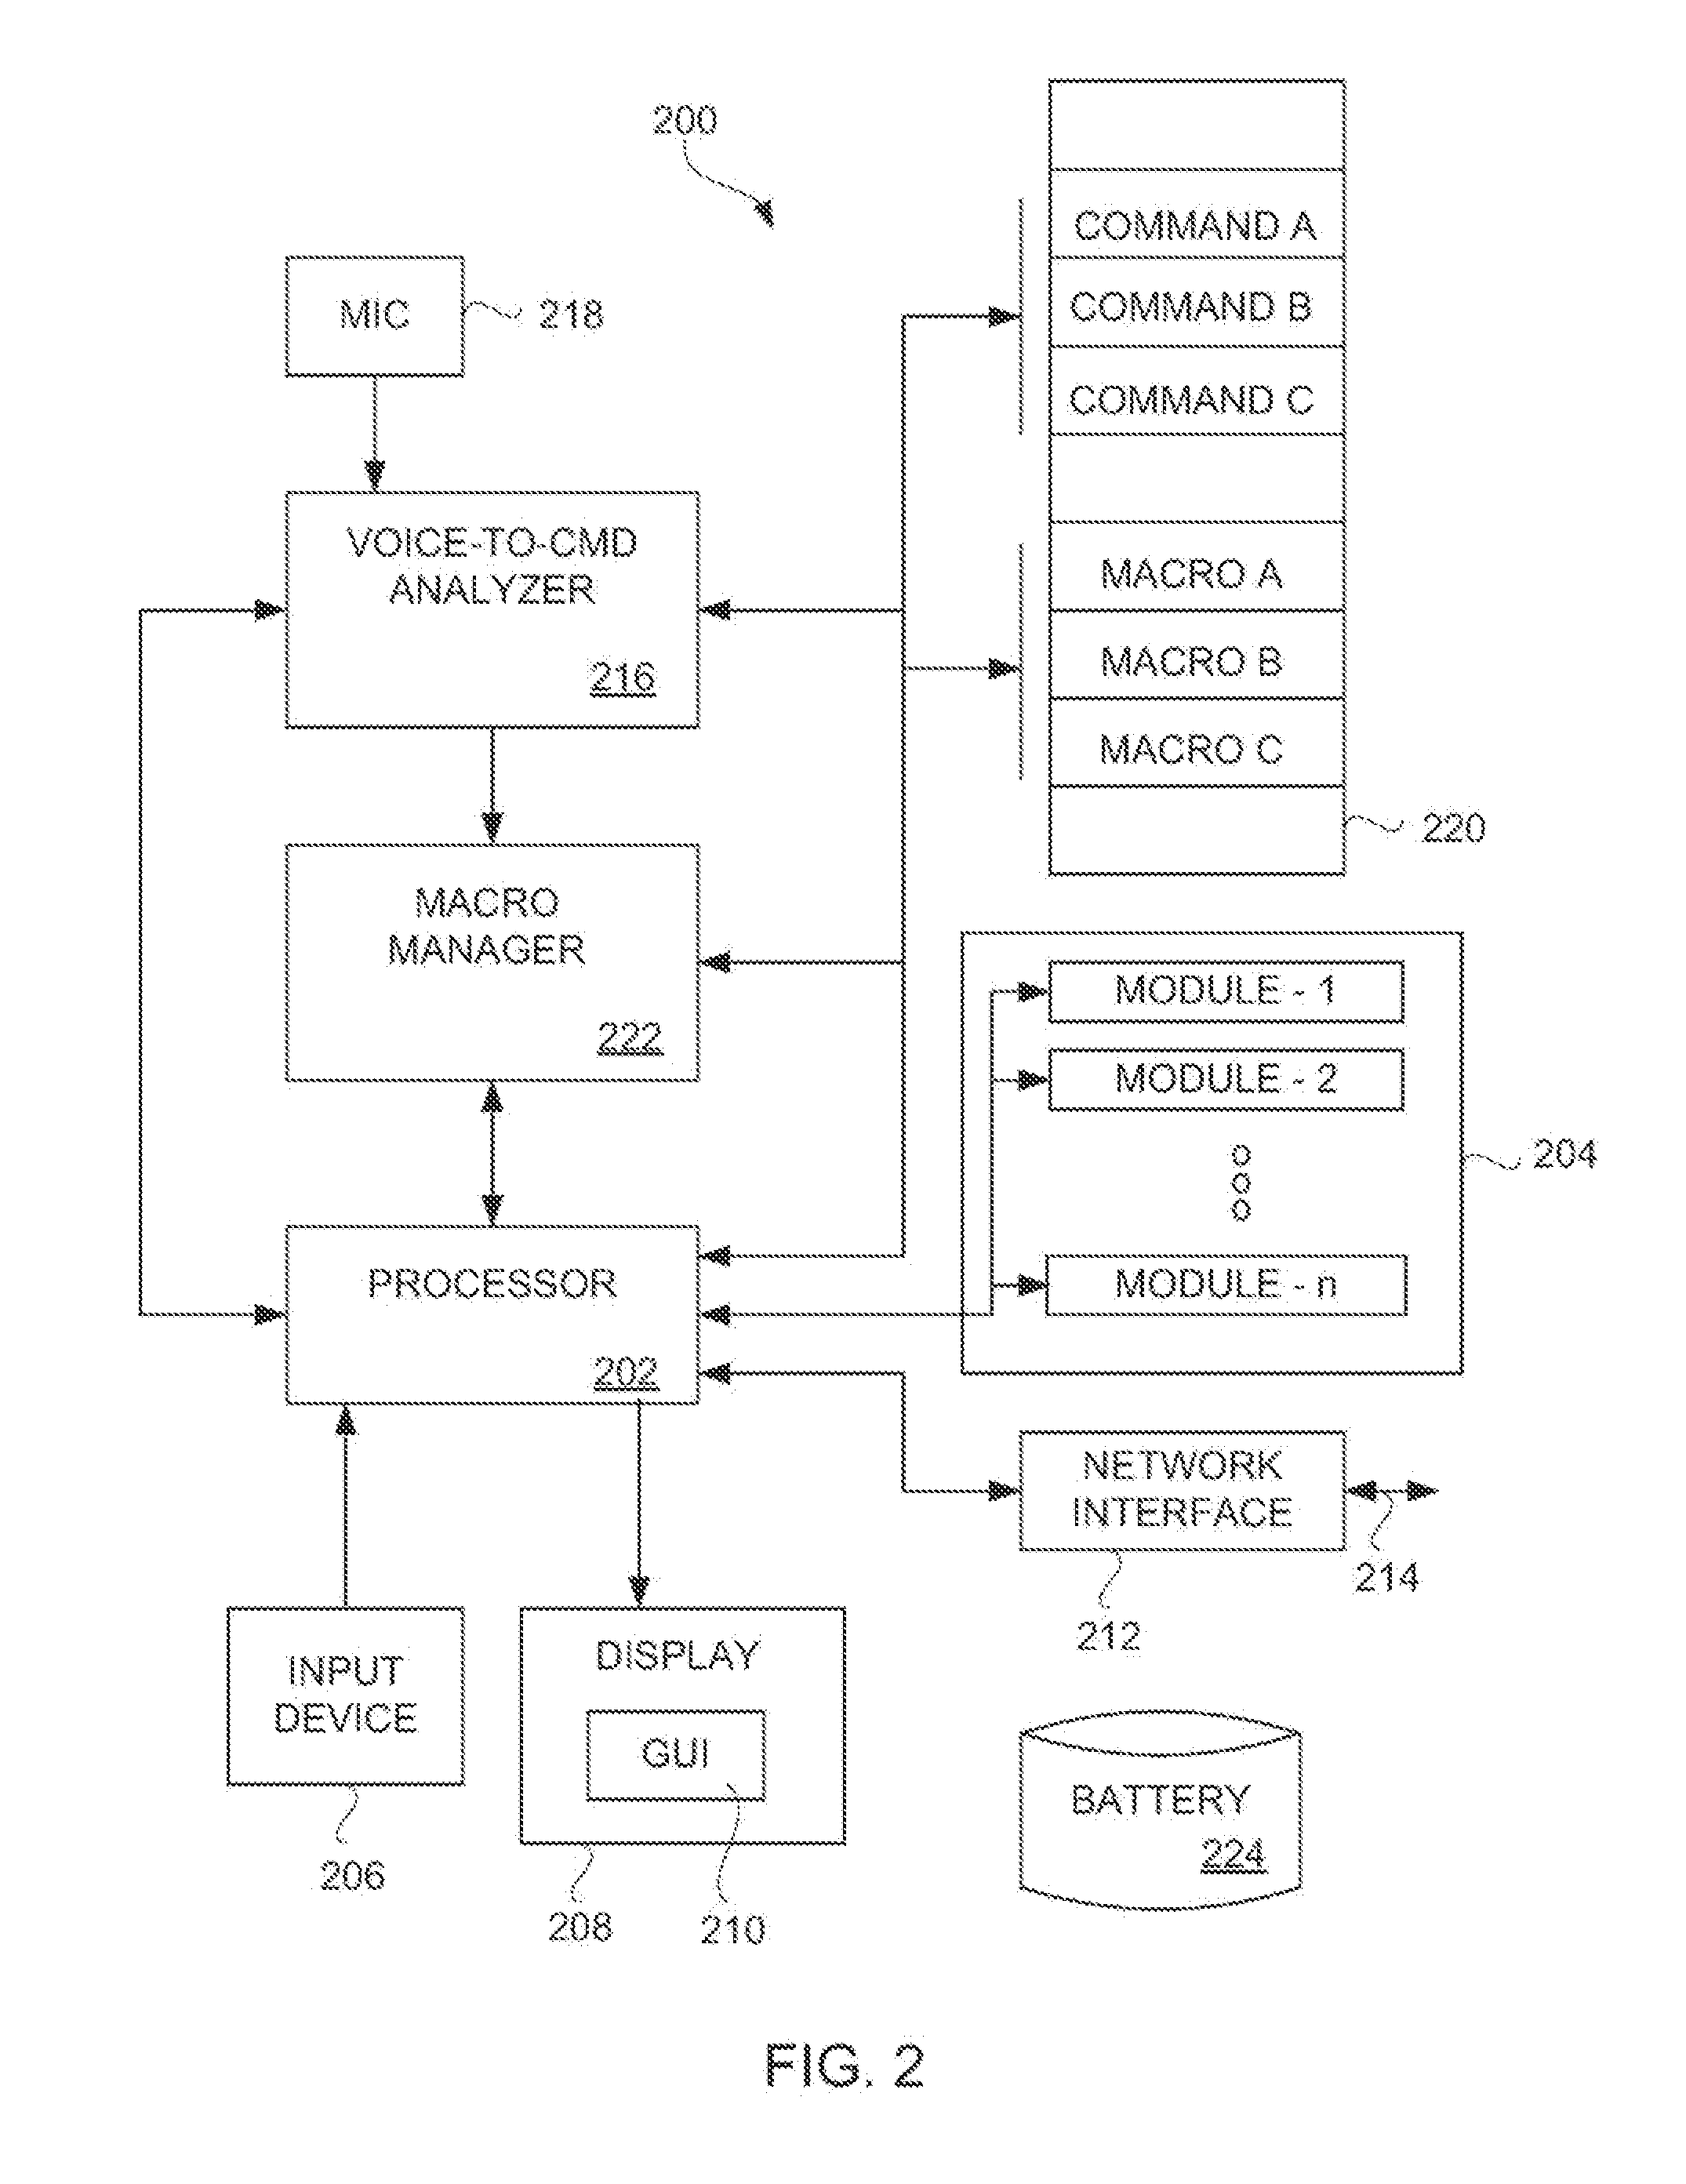 Method and system for operating a multi-function portable electronic device using voice-activation